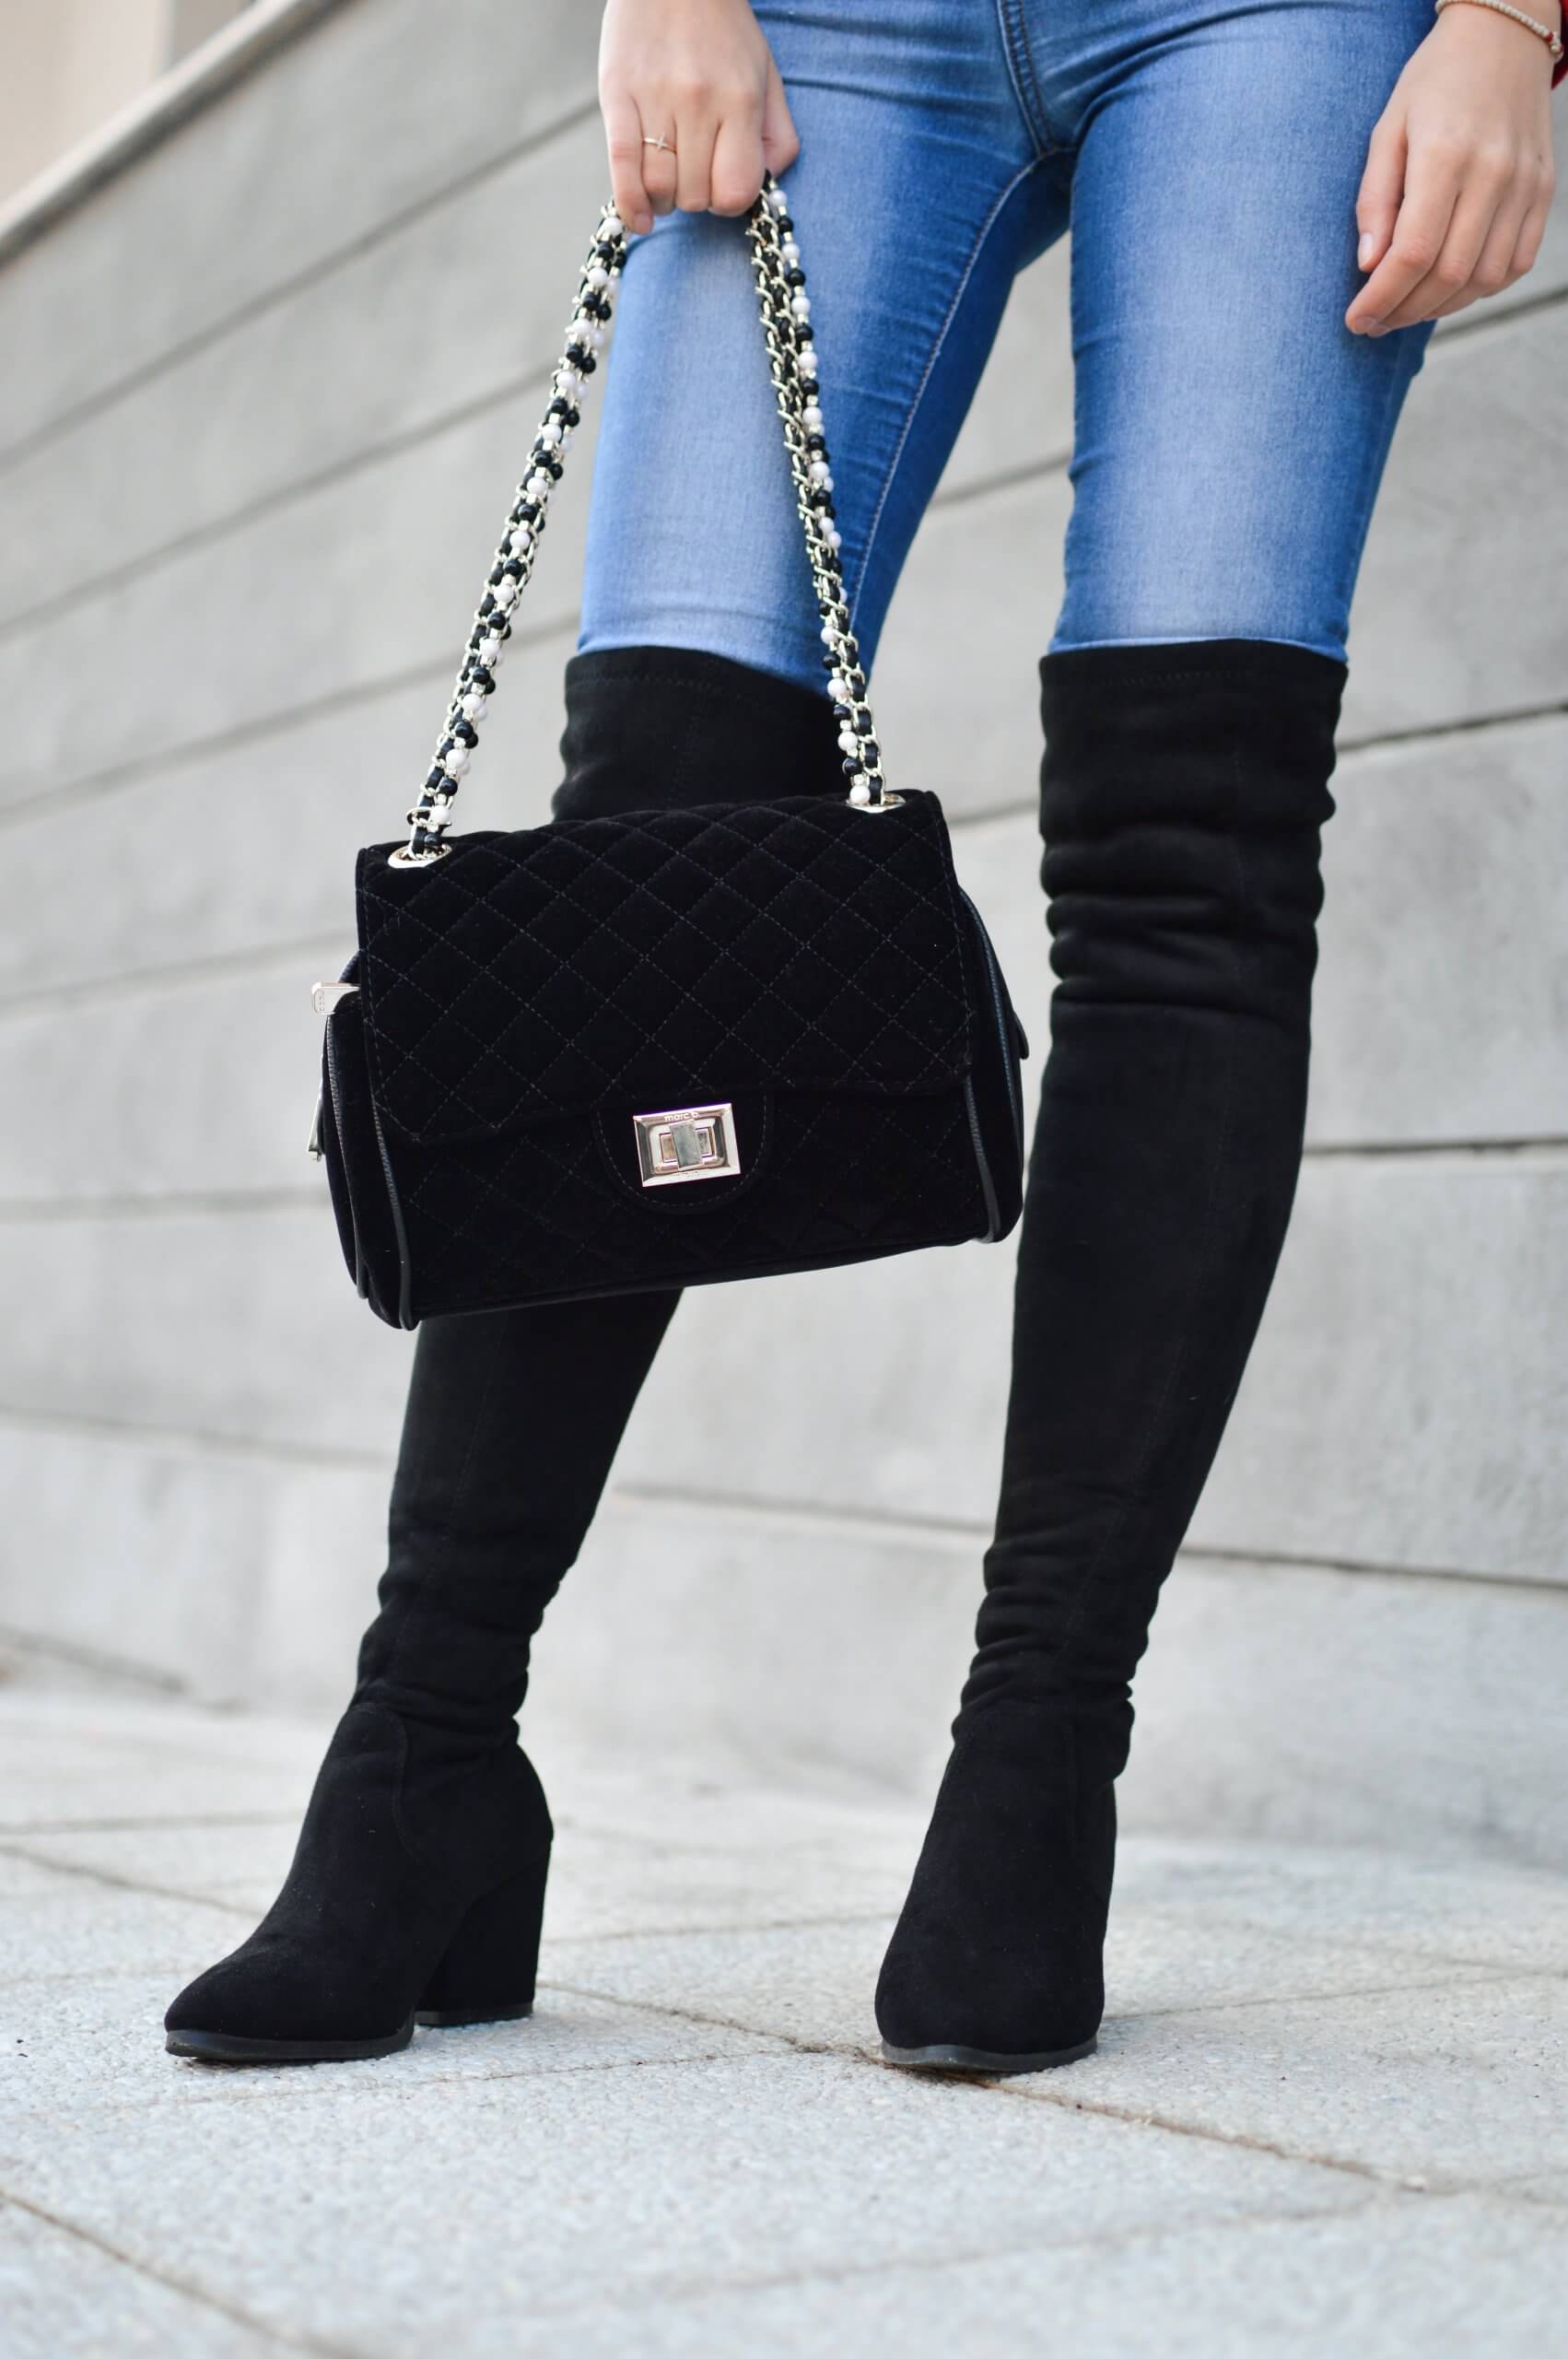 Tall boots and a black bag. 